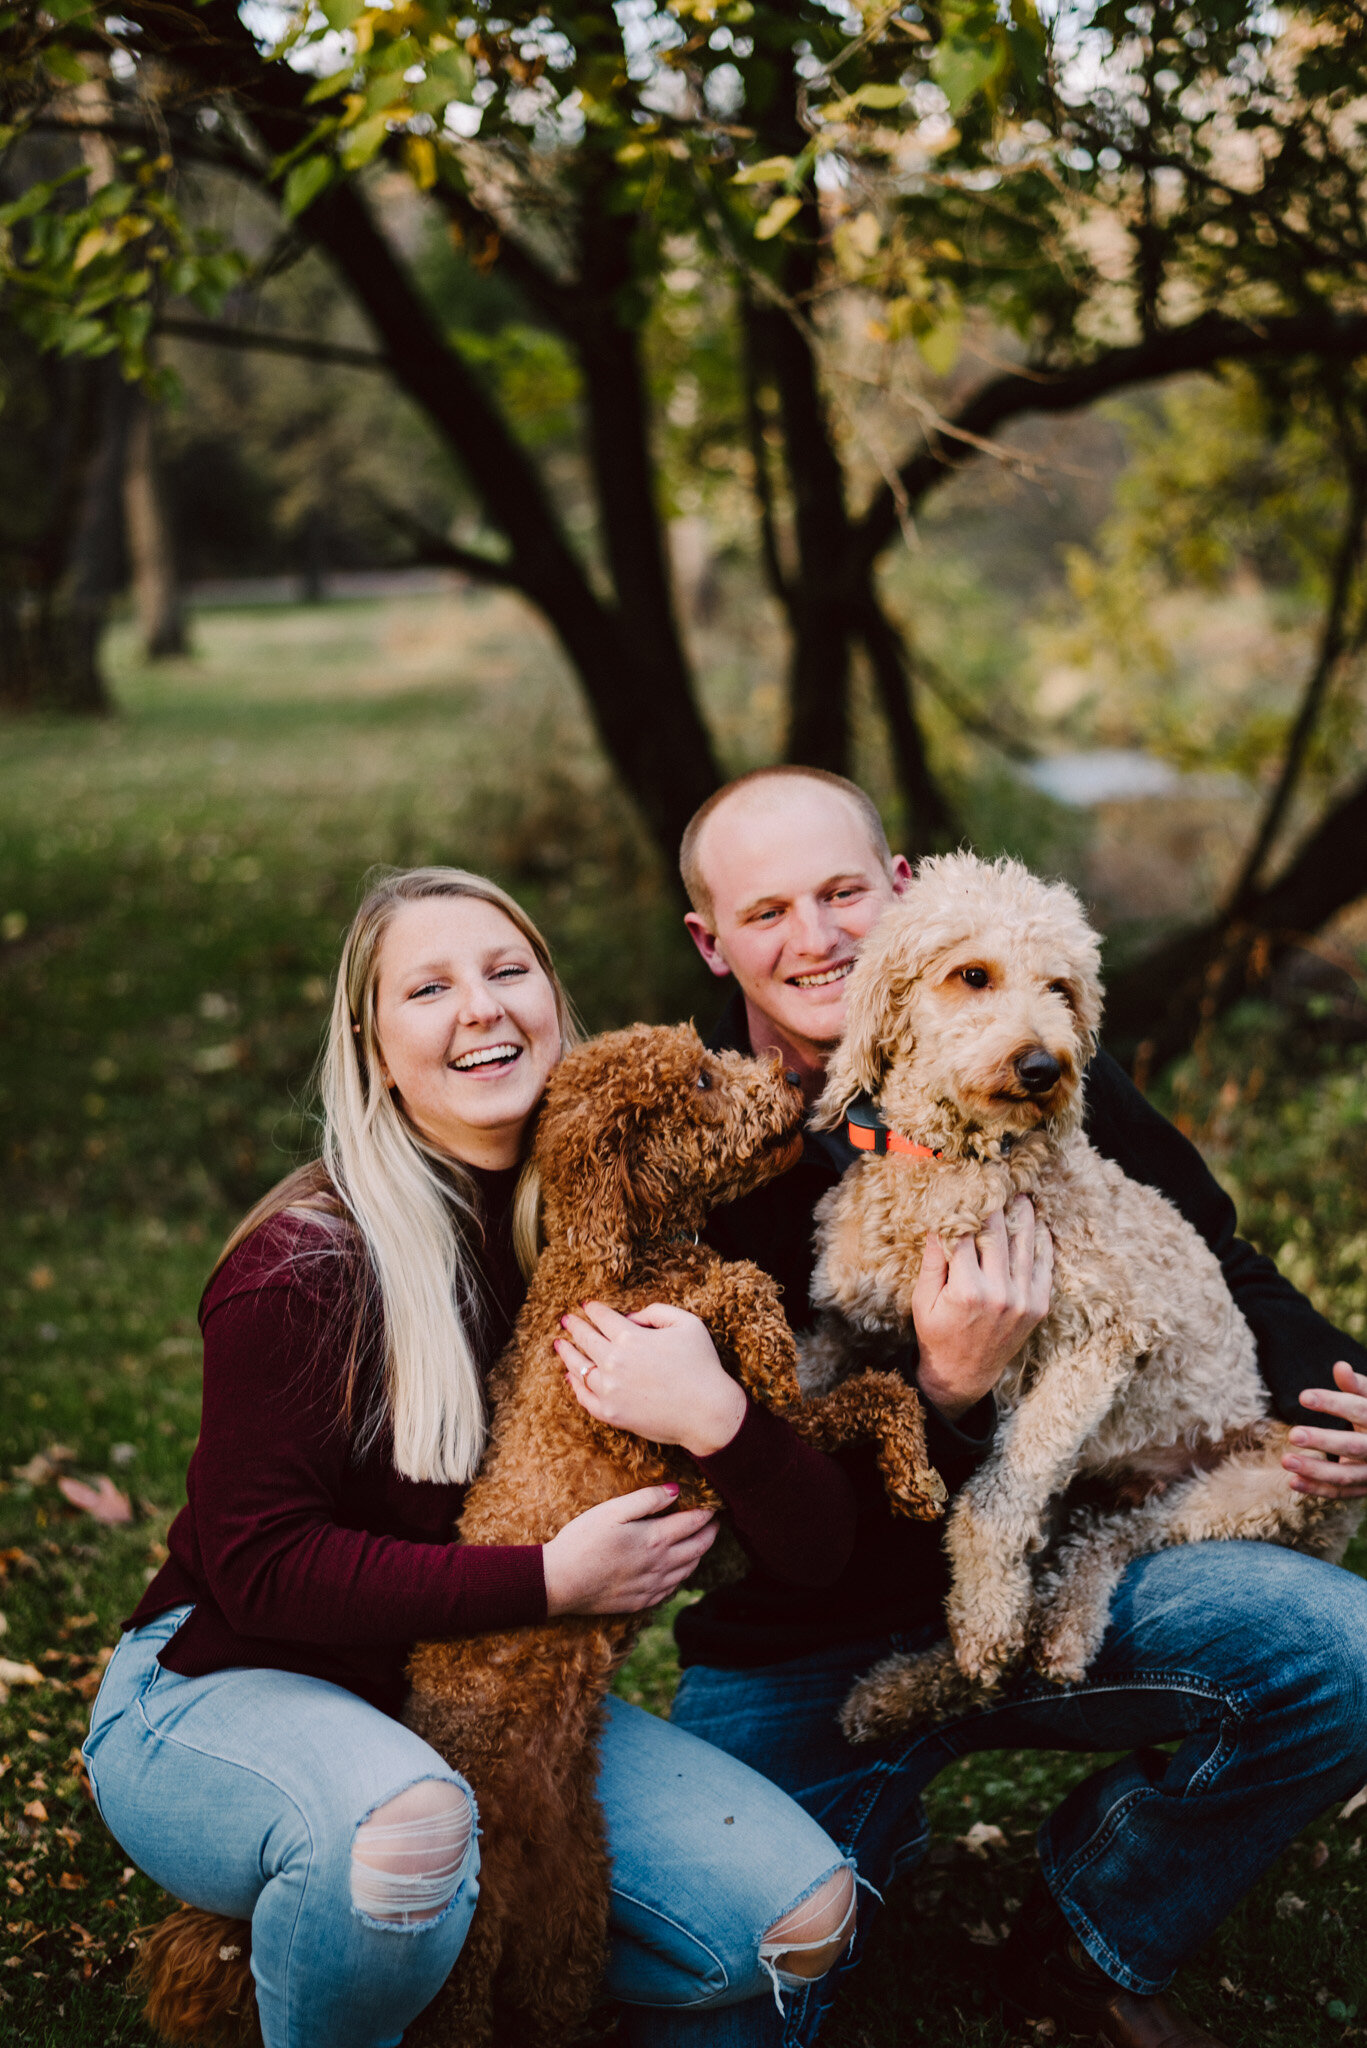 Top 5 Tips For Your Session With The Fur Babes - Iowa Wedding Photographer